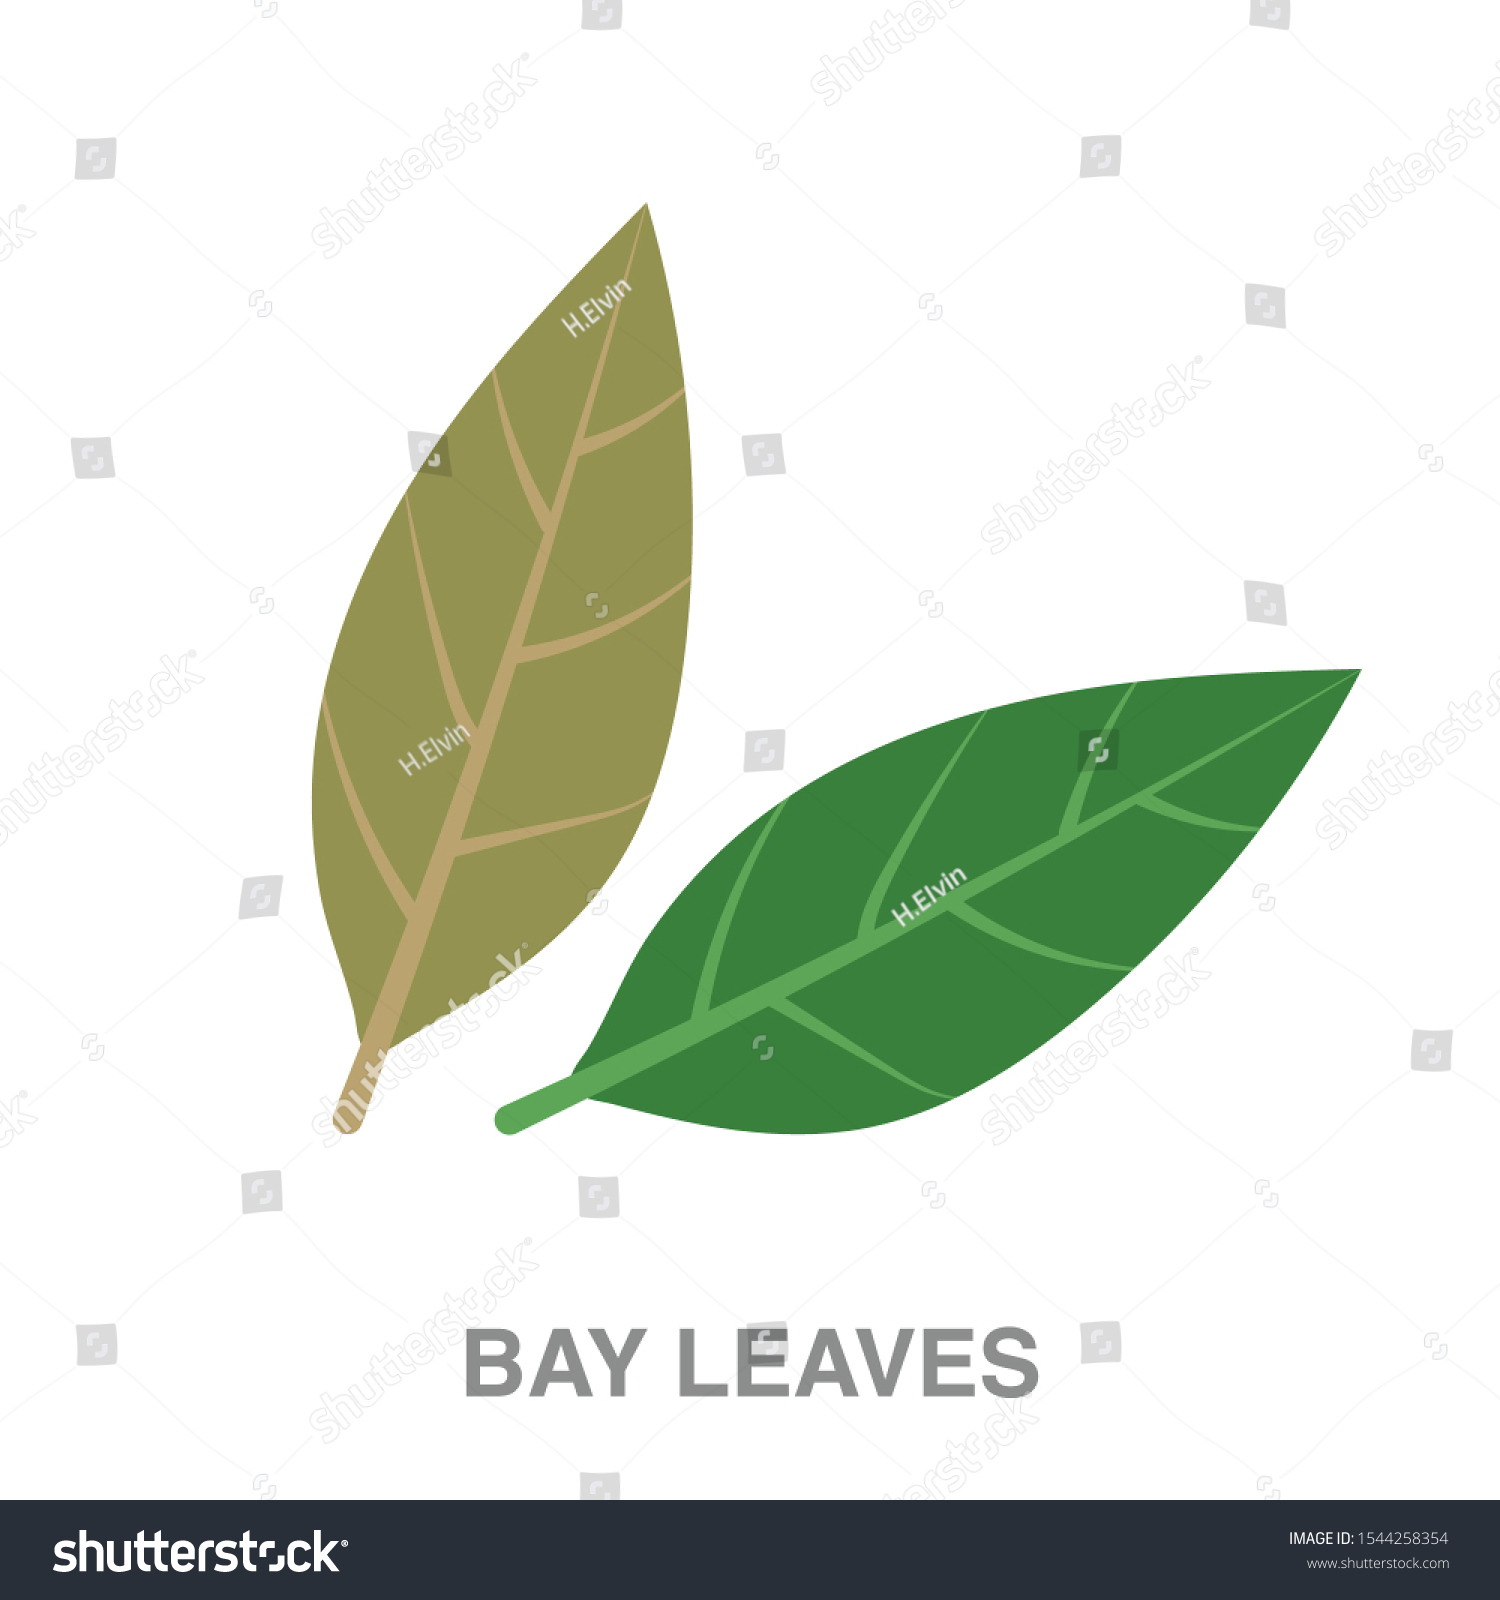 SVG of Bay leaves flat icon on white transparent background. You can be used bay leaves icon for several purposes. svg